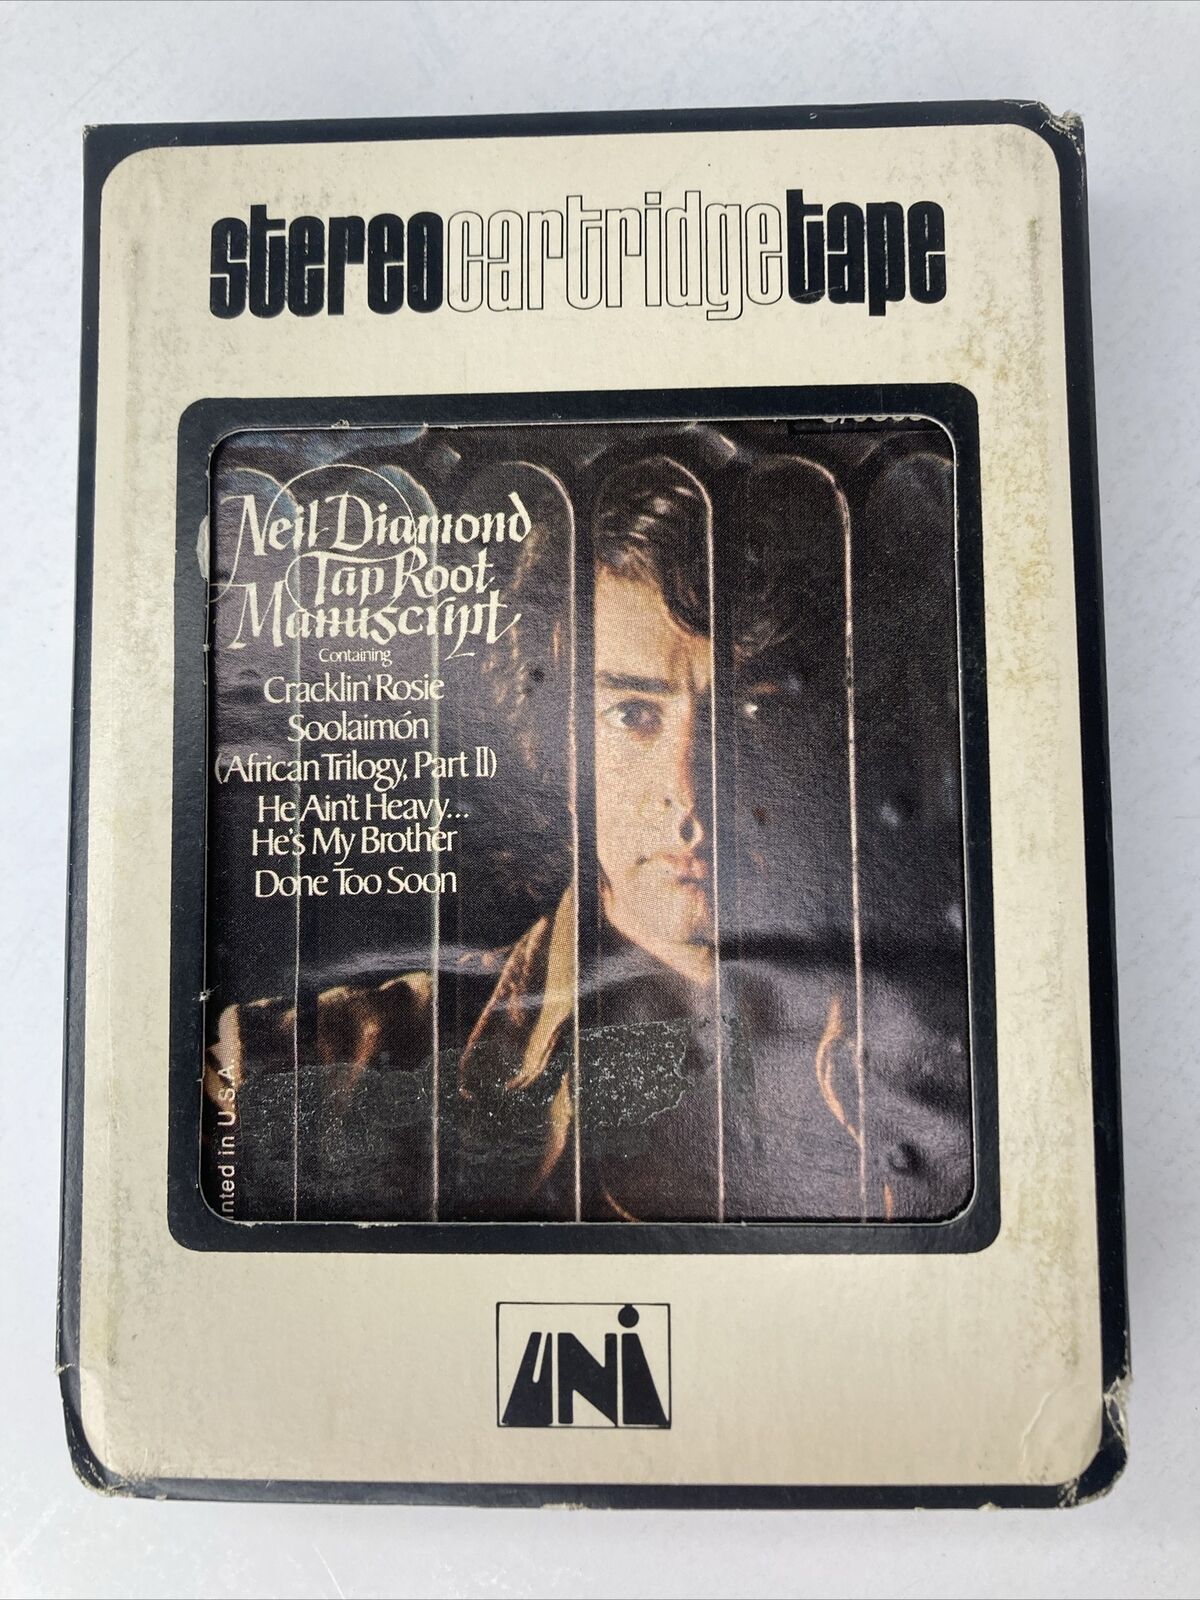 8 Track Tape Neil Diamond Tap Root Manuscript Vintage “Done Too Soon” + Working￼